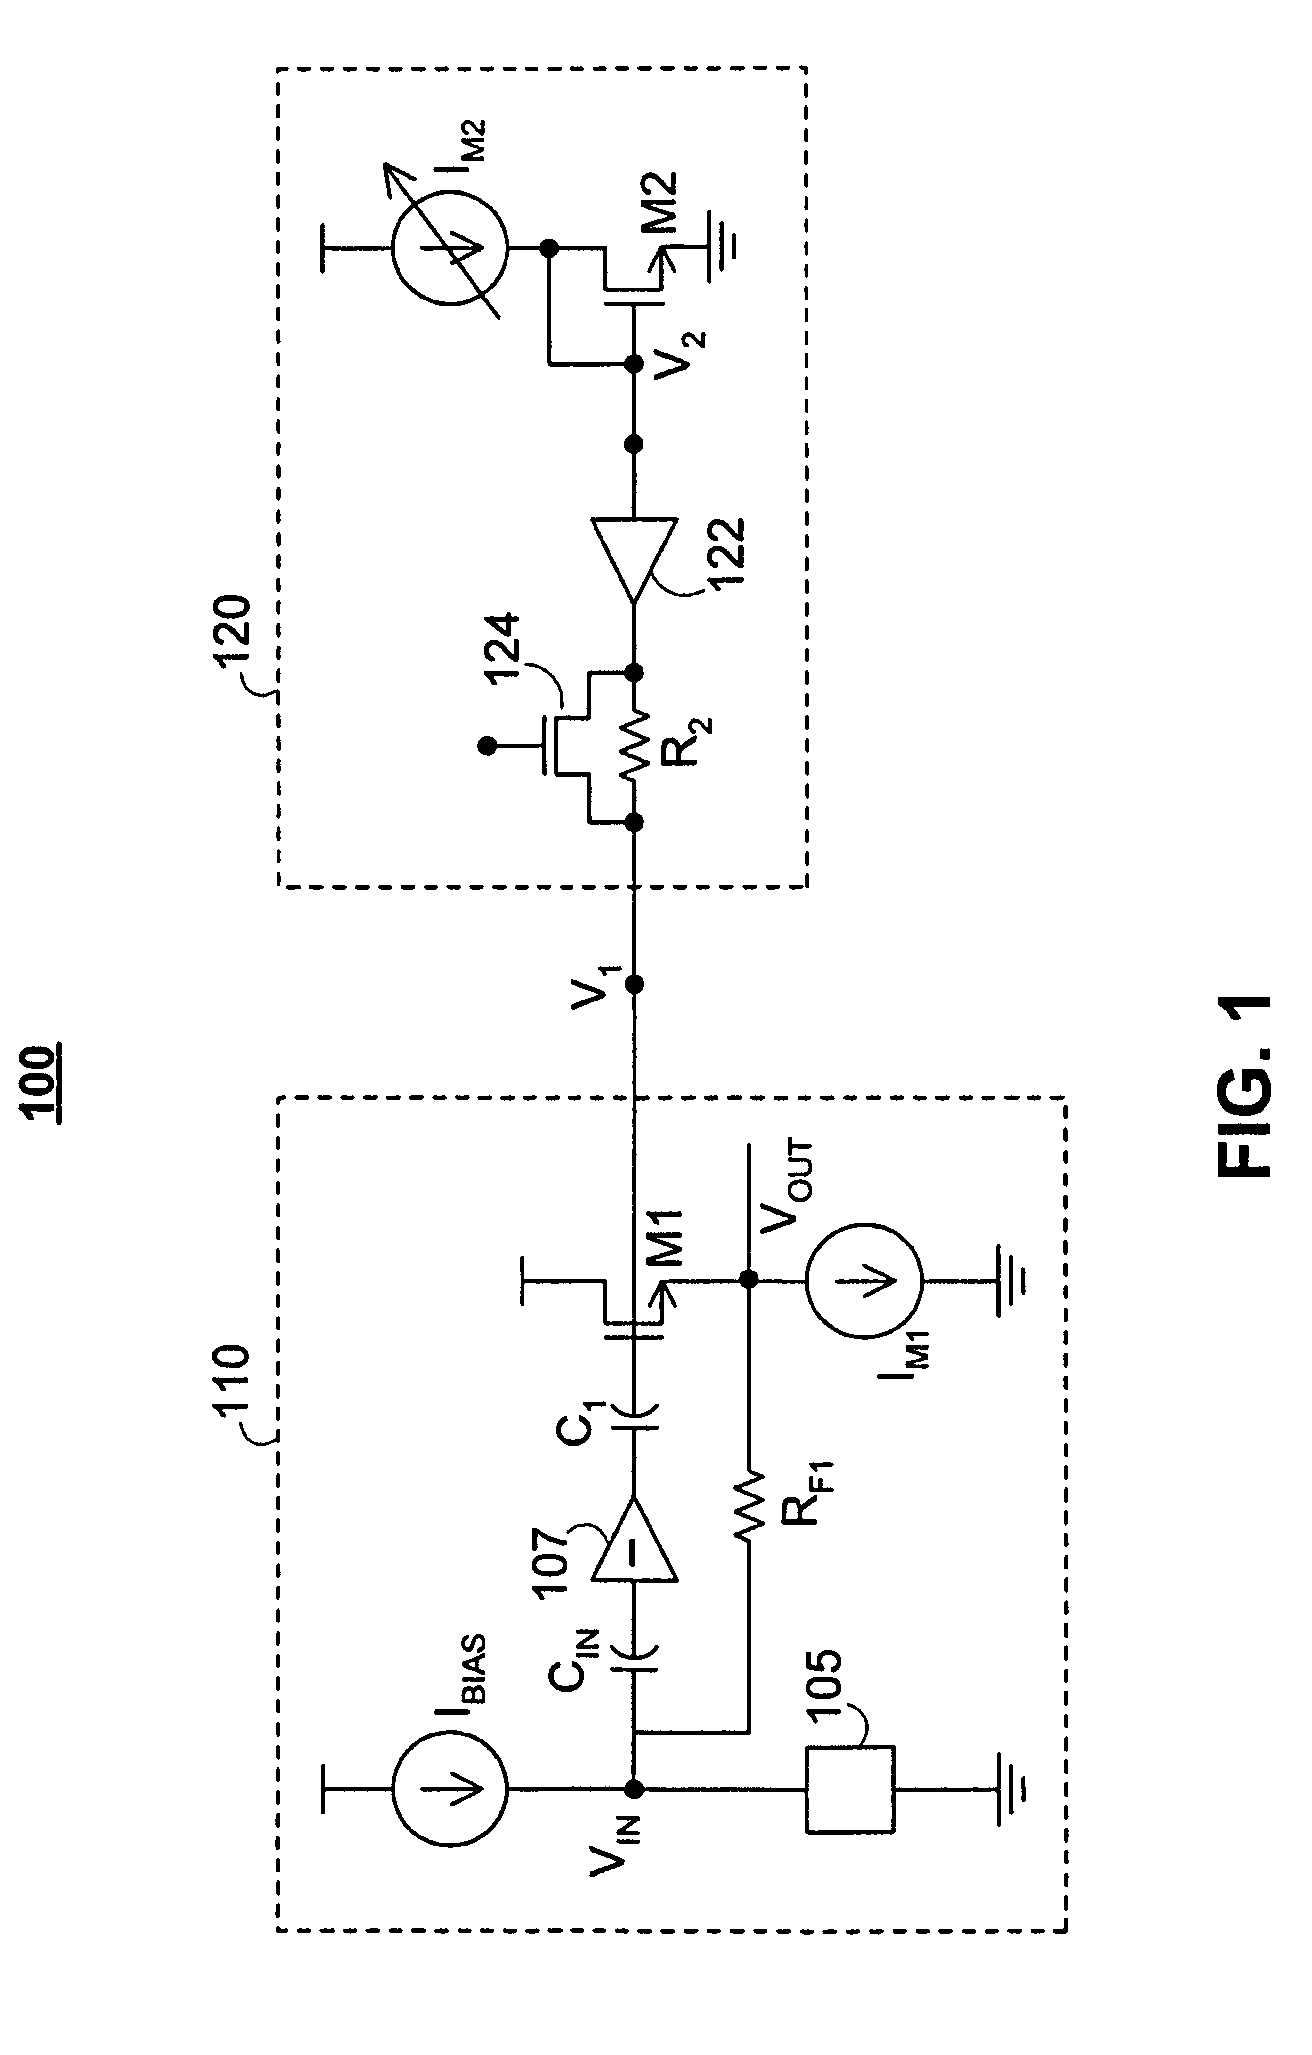 Open loop DC control for a transimpedance feedback amplifier